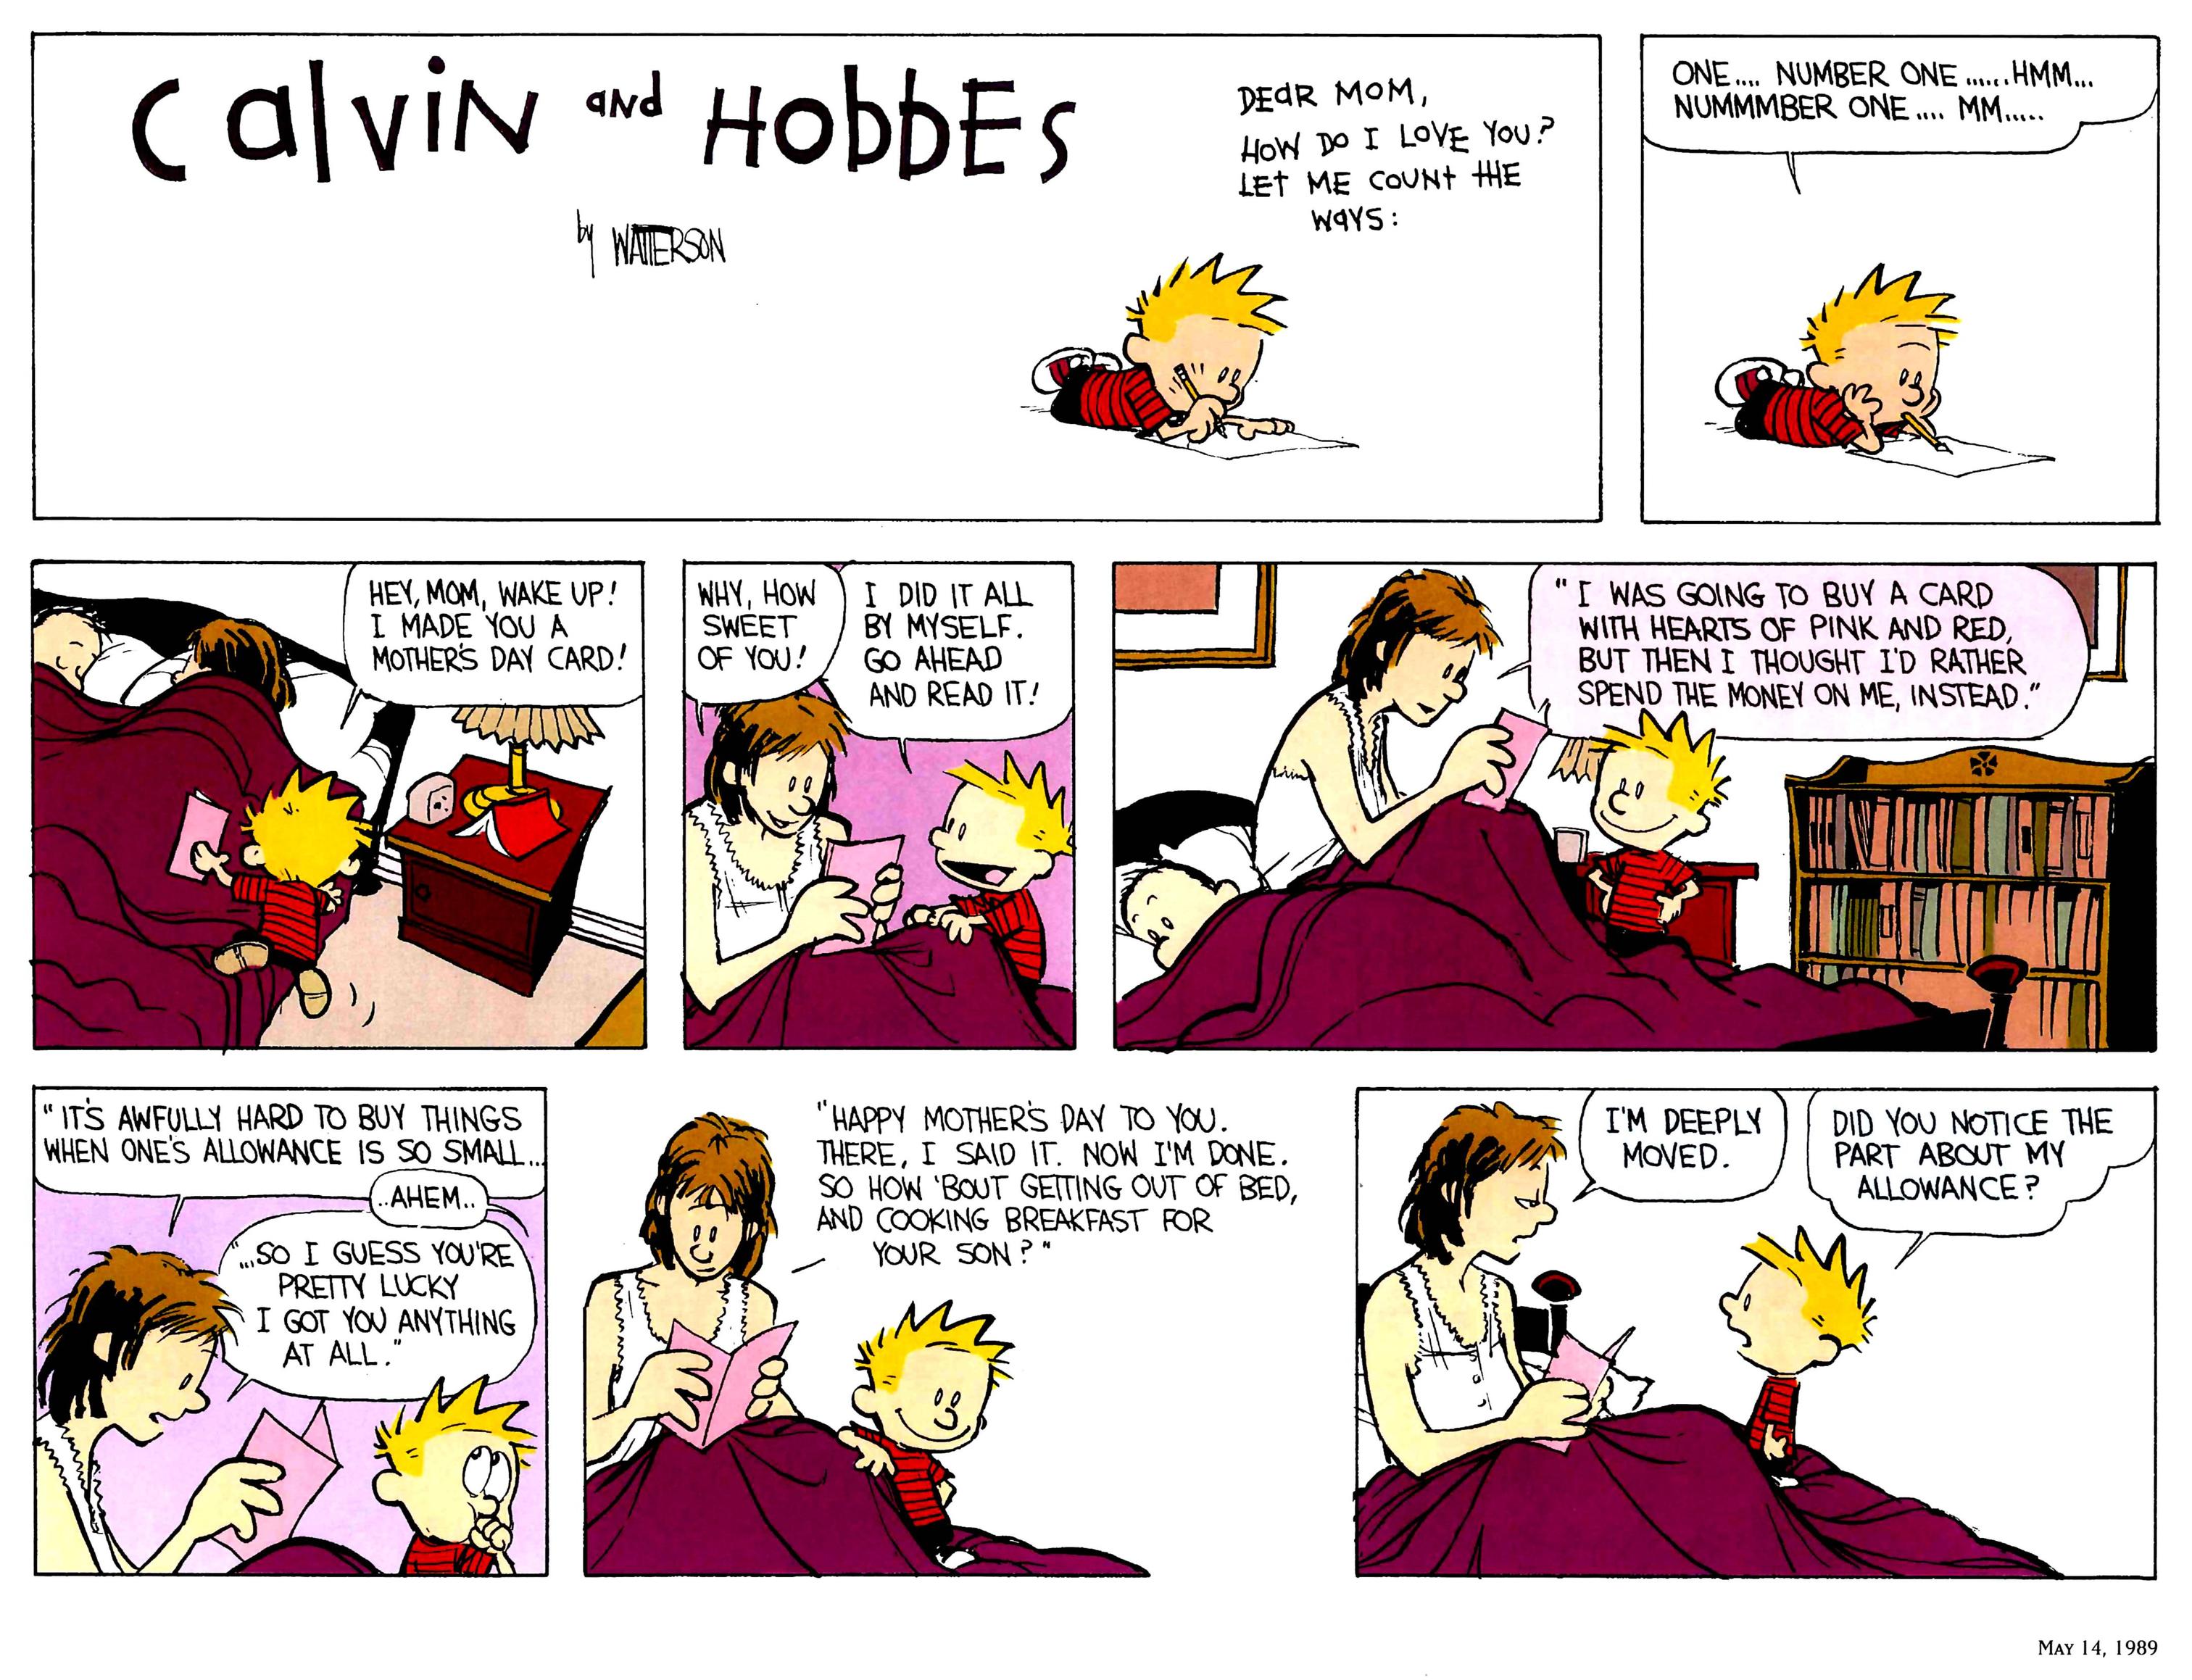 calvin and hobbes – mothers day card